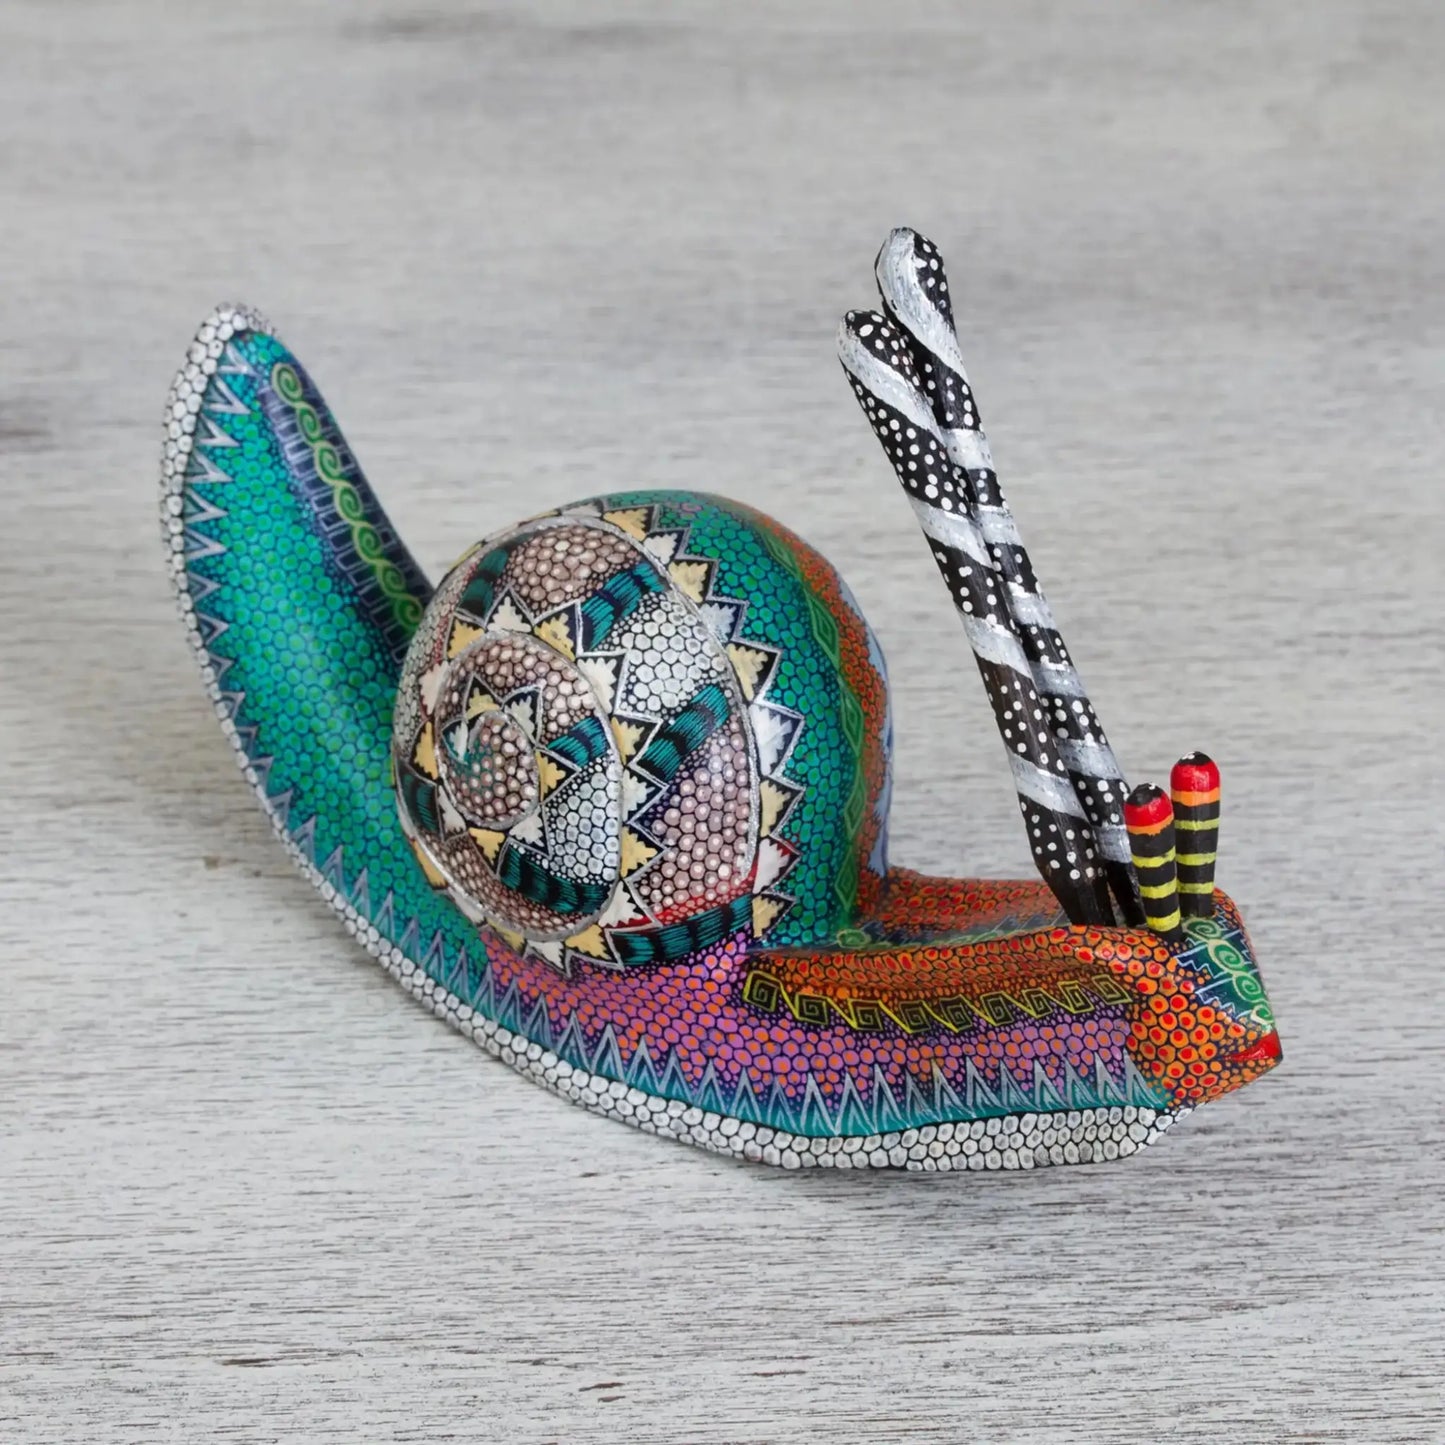 Vibrant Snail - Hand-Painted Alebrije Wood Sculpture from